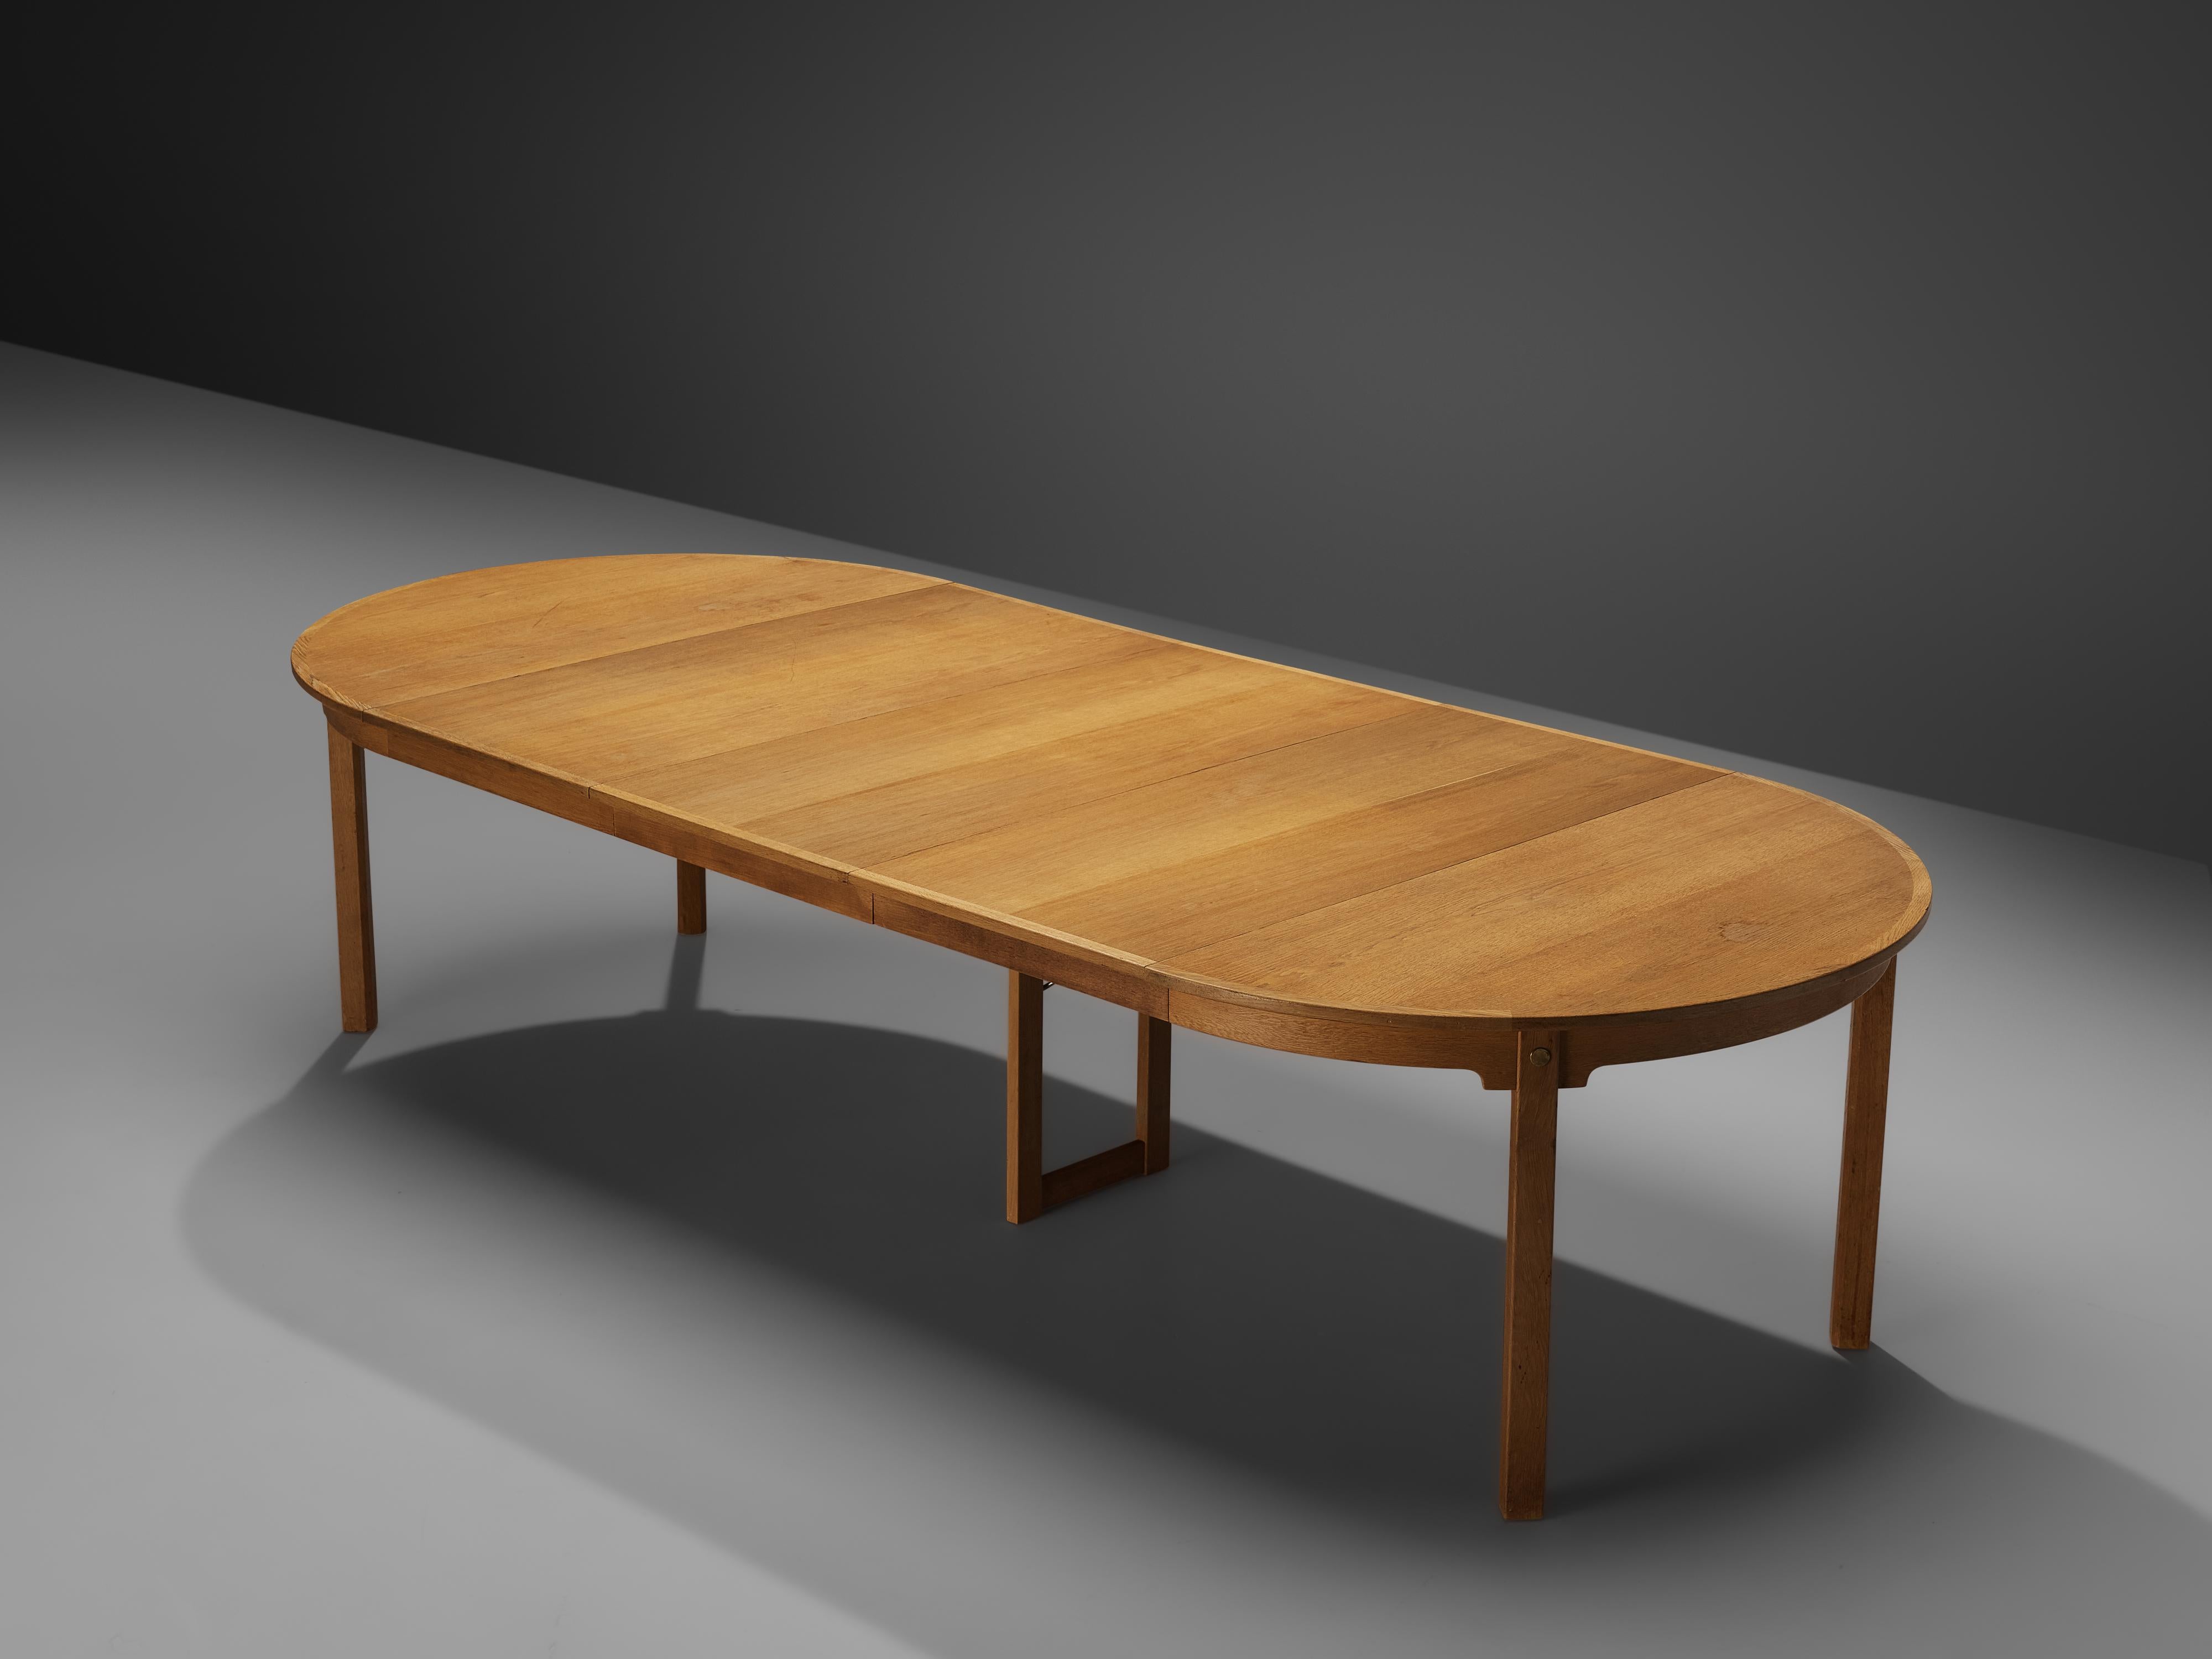 Extendable dining table, oak, brass, Denmark, 1950s.

This dining table comes with three extra leaves that allow you to transform the small round table into a long oval dining table. The table than spans over 3m (118in.). The oakwood shows a vivid